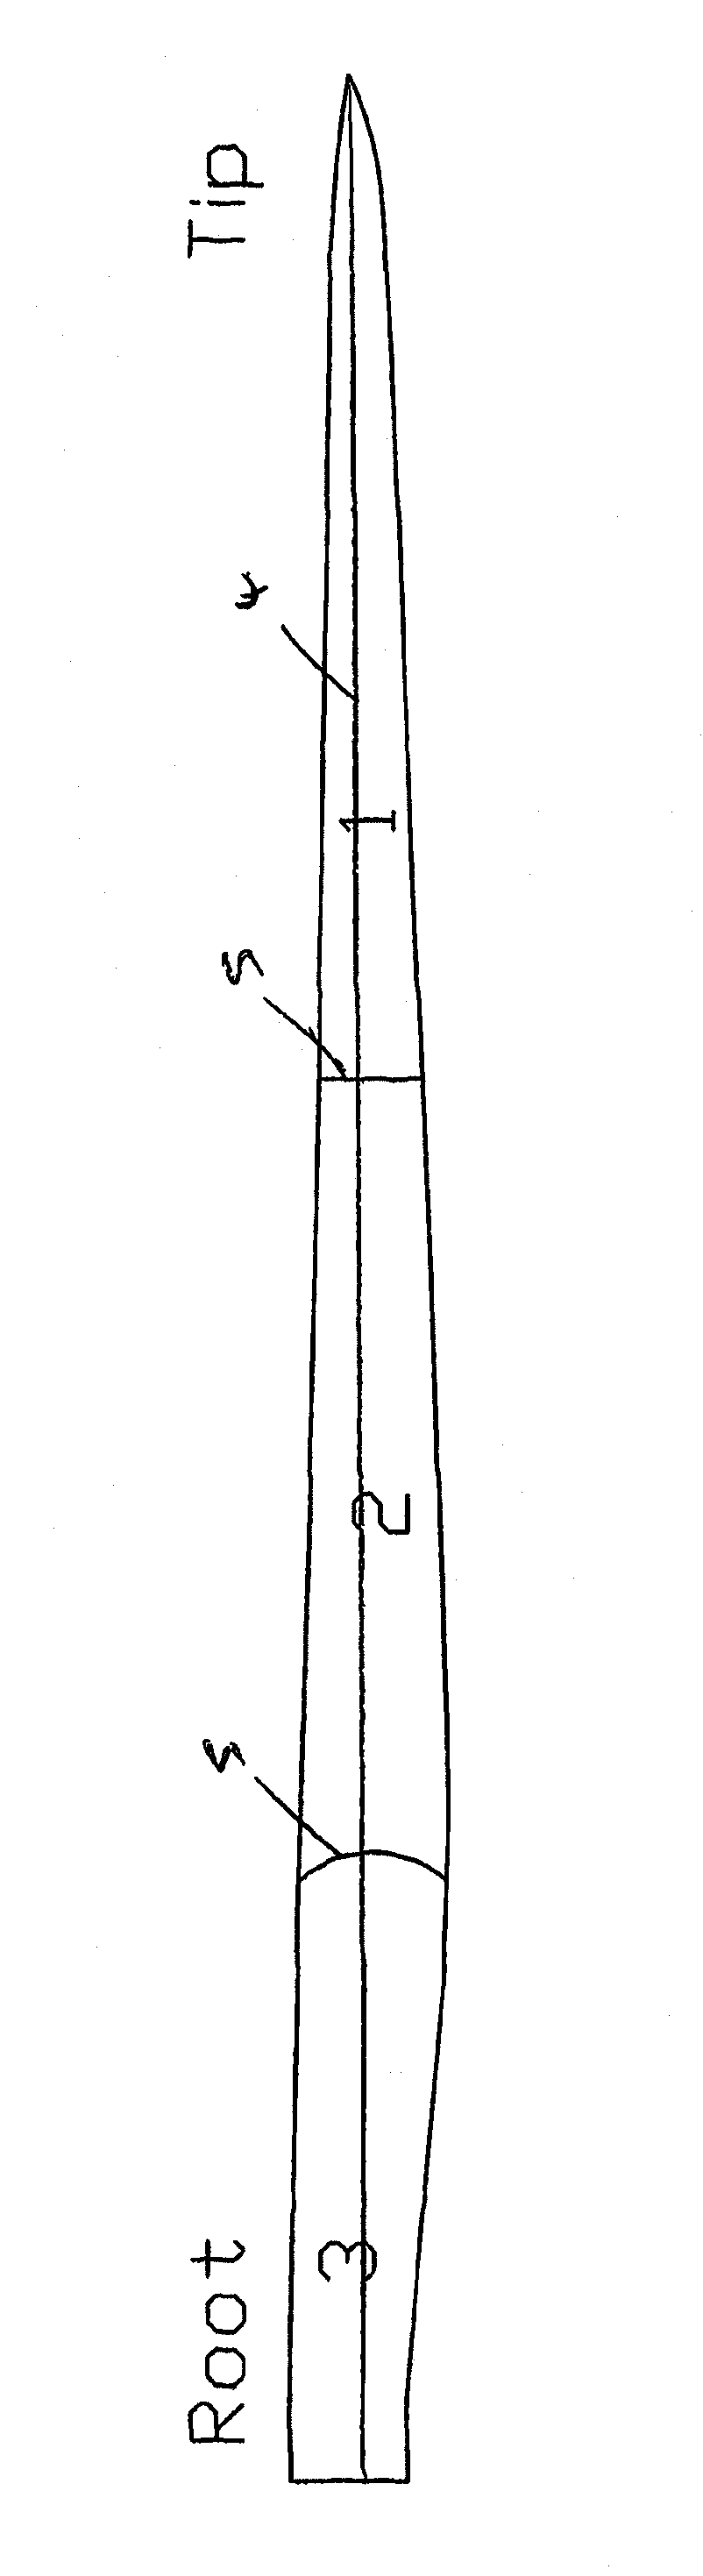 Blade for a turbine operating in water